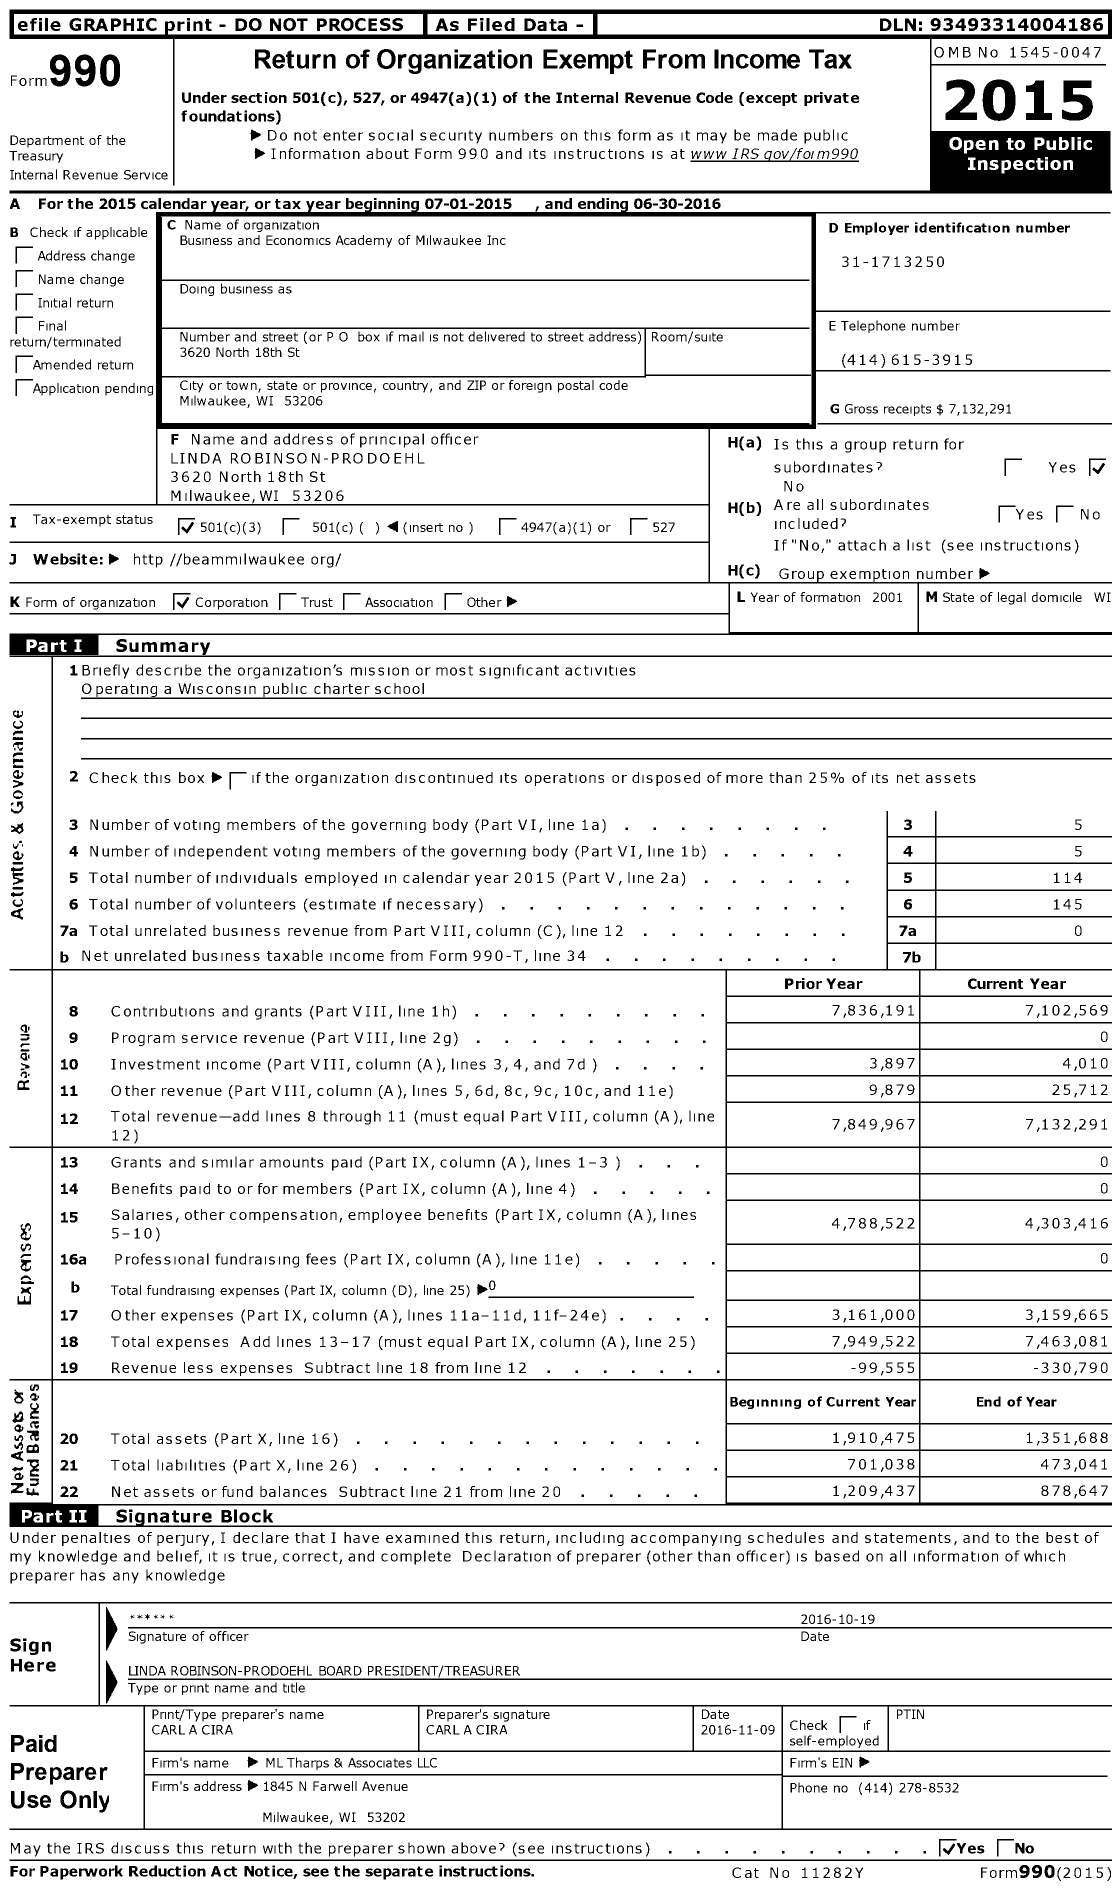 Image of first page of 2015 Form 990 for Business and Economics Academy of Milwaukee (BEAM)